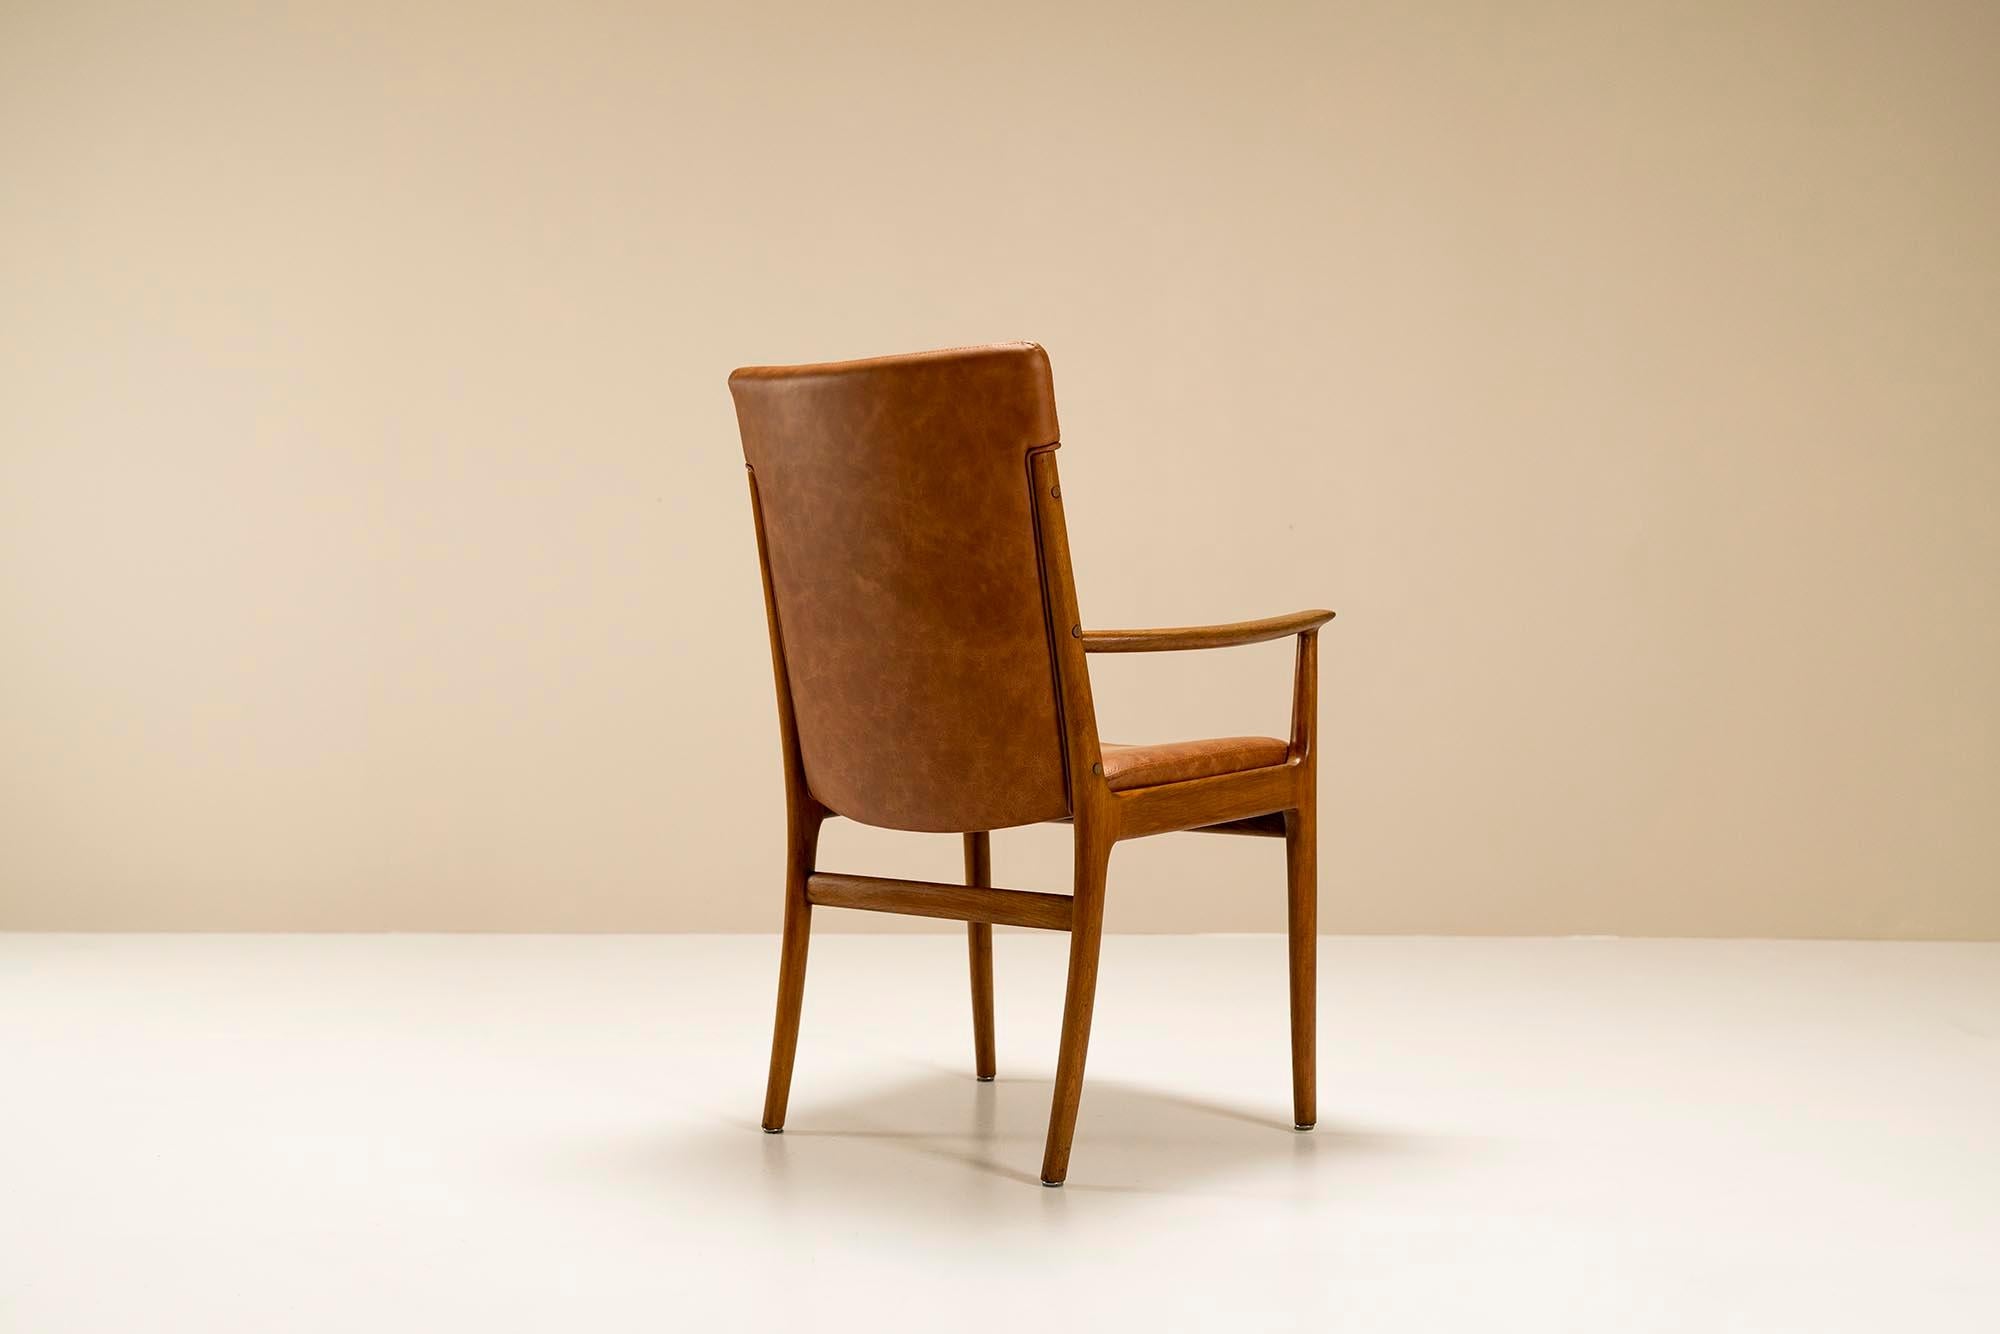 Four Armchairs in Ash Wood and Leather by Kai Lyngfeldt Larsen, Denmark, 1960s For Sale 1